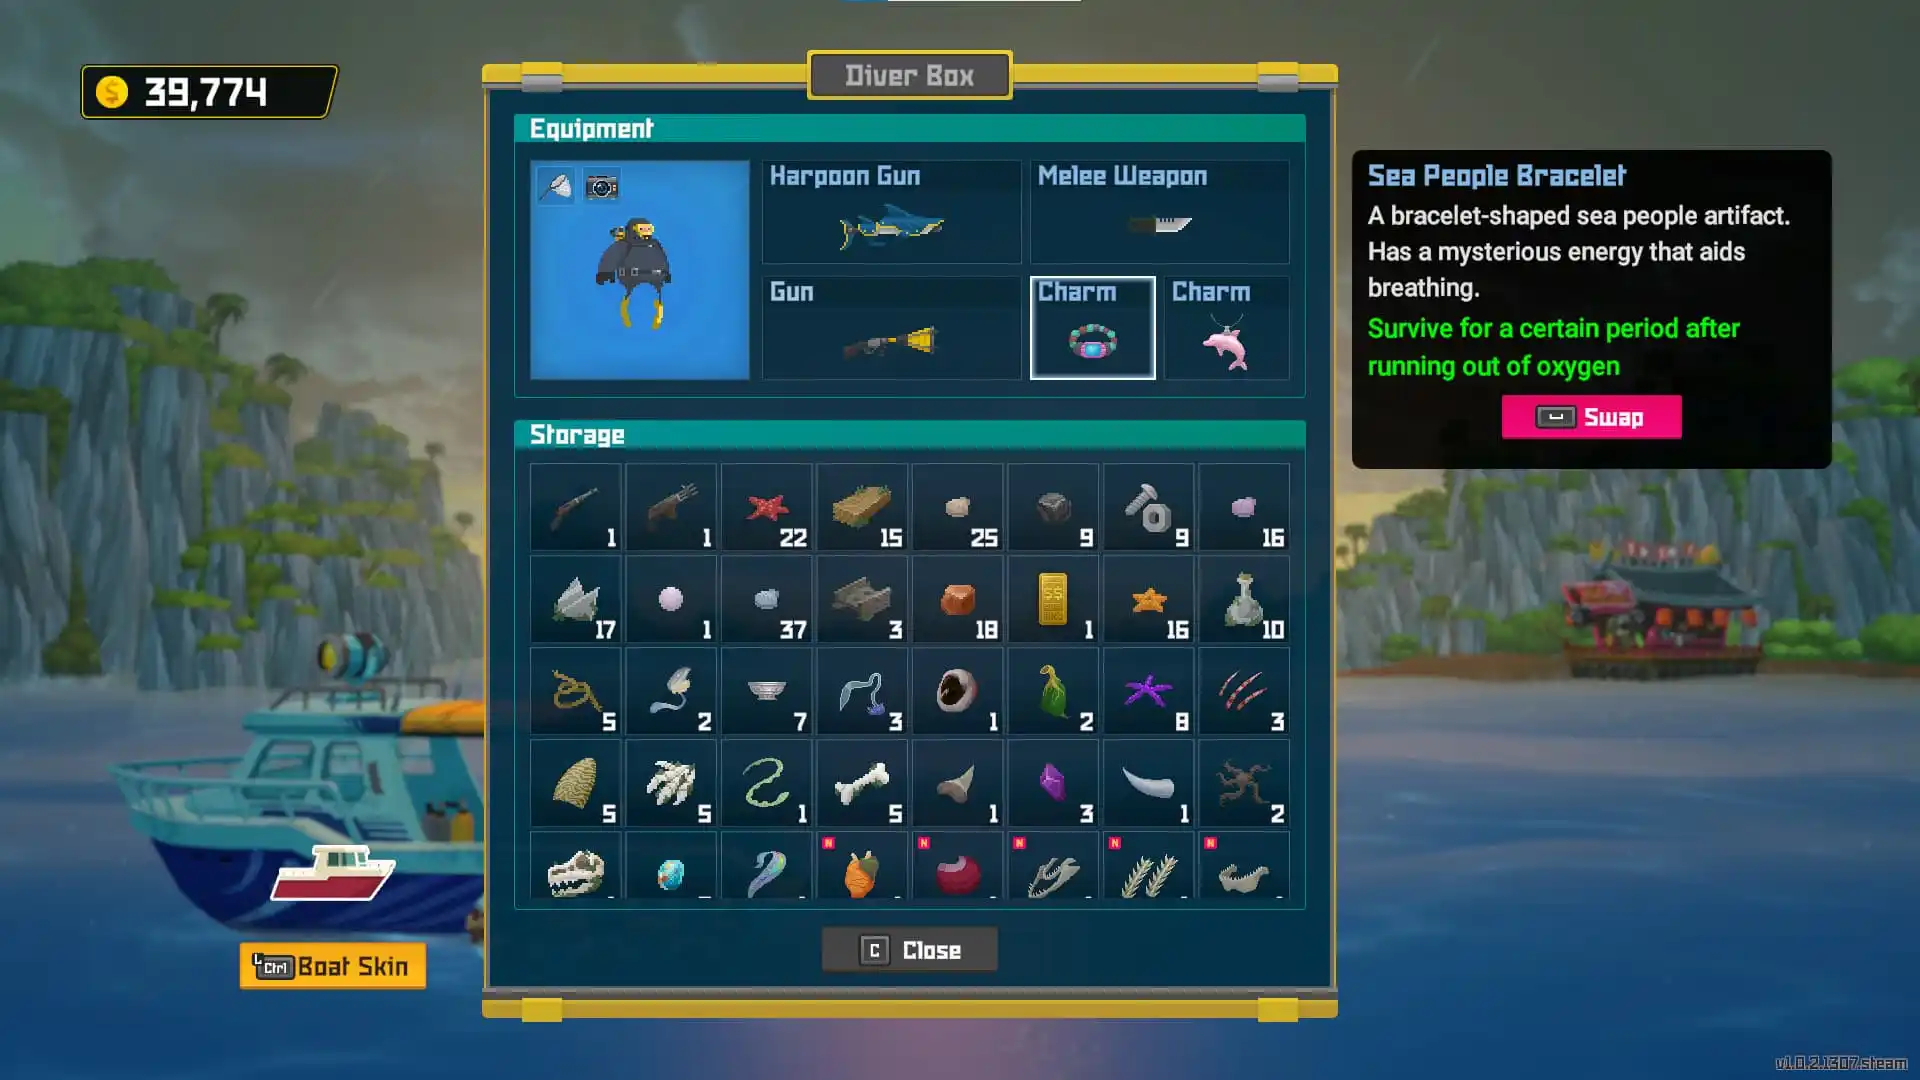 The Diver box allows players to equip various charms in Dave the Diver.